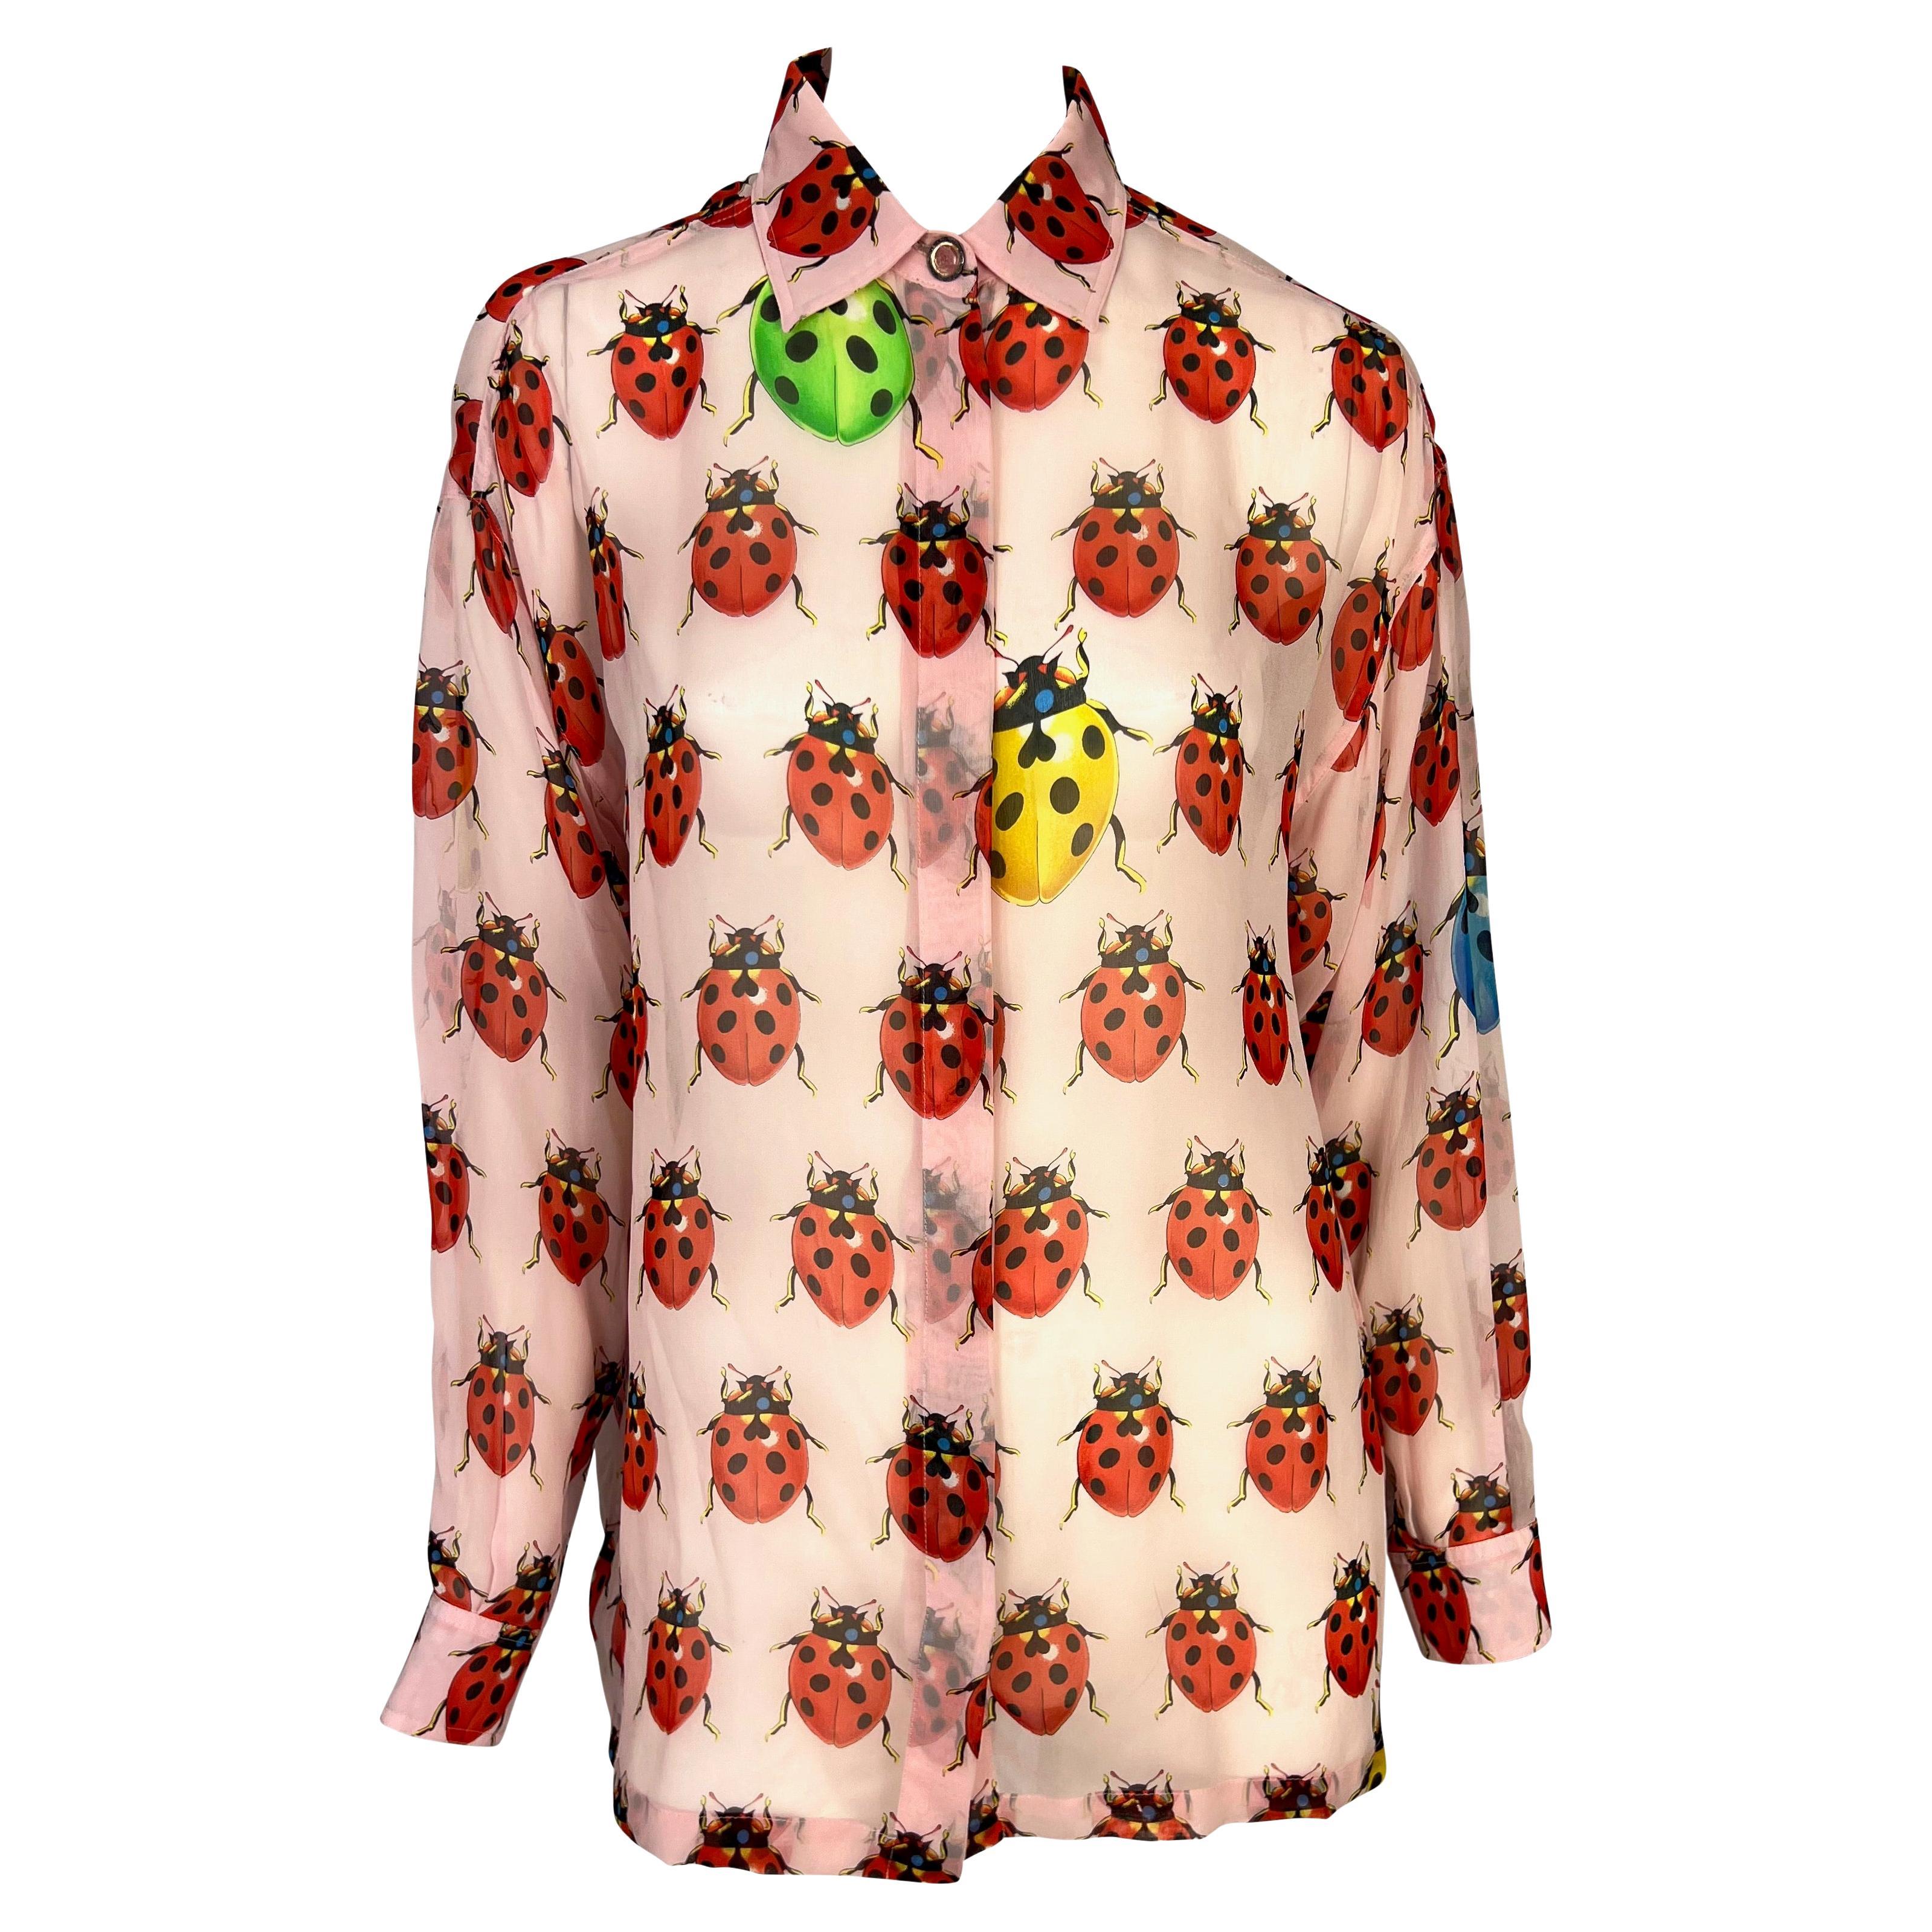 S/S 1995 Gianni Versace Couture Sheer Pink Ladybug Print Medusa Button Blouse For Sale